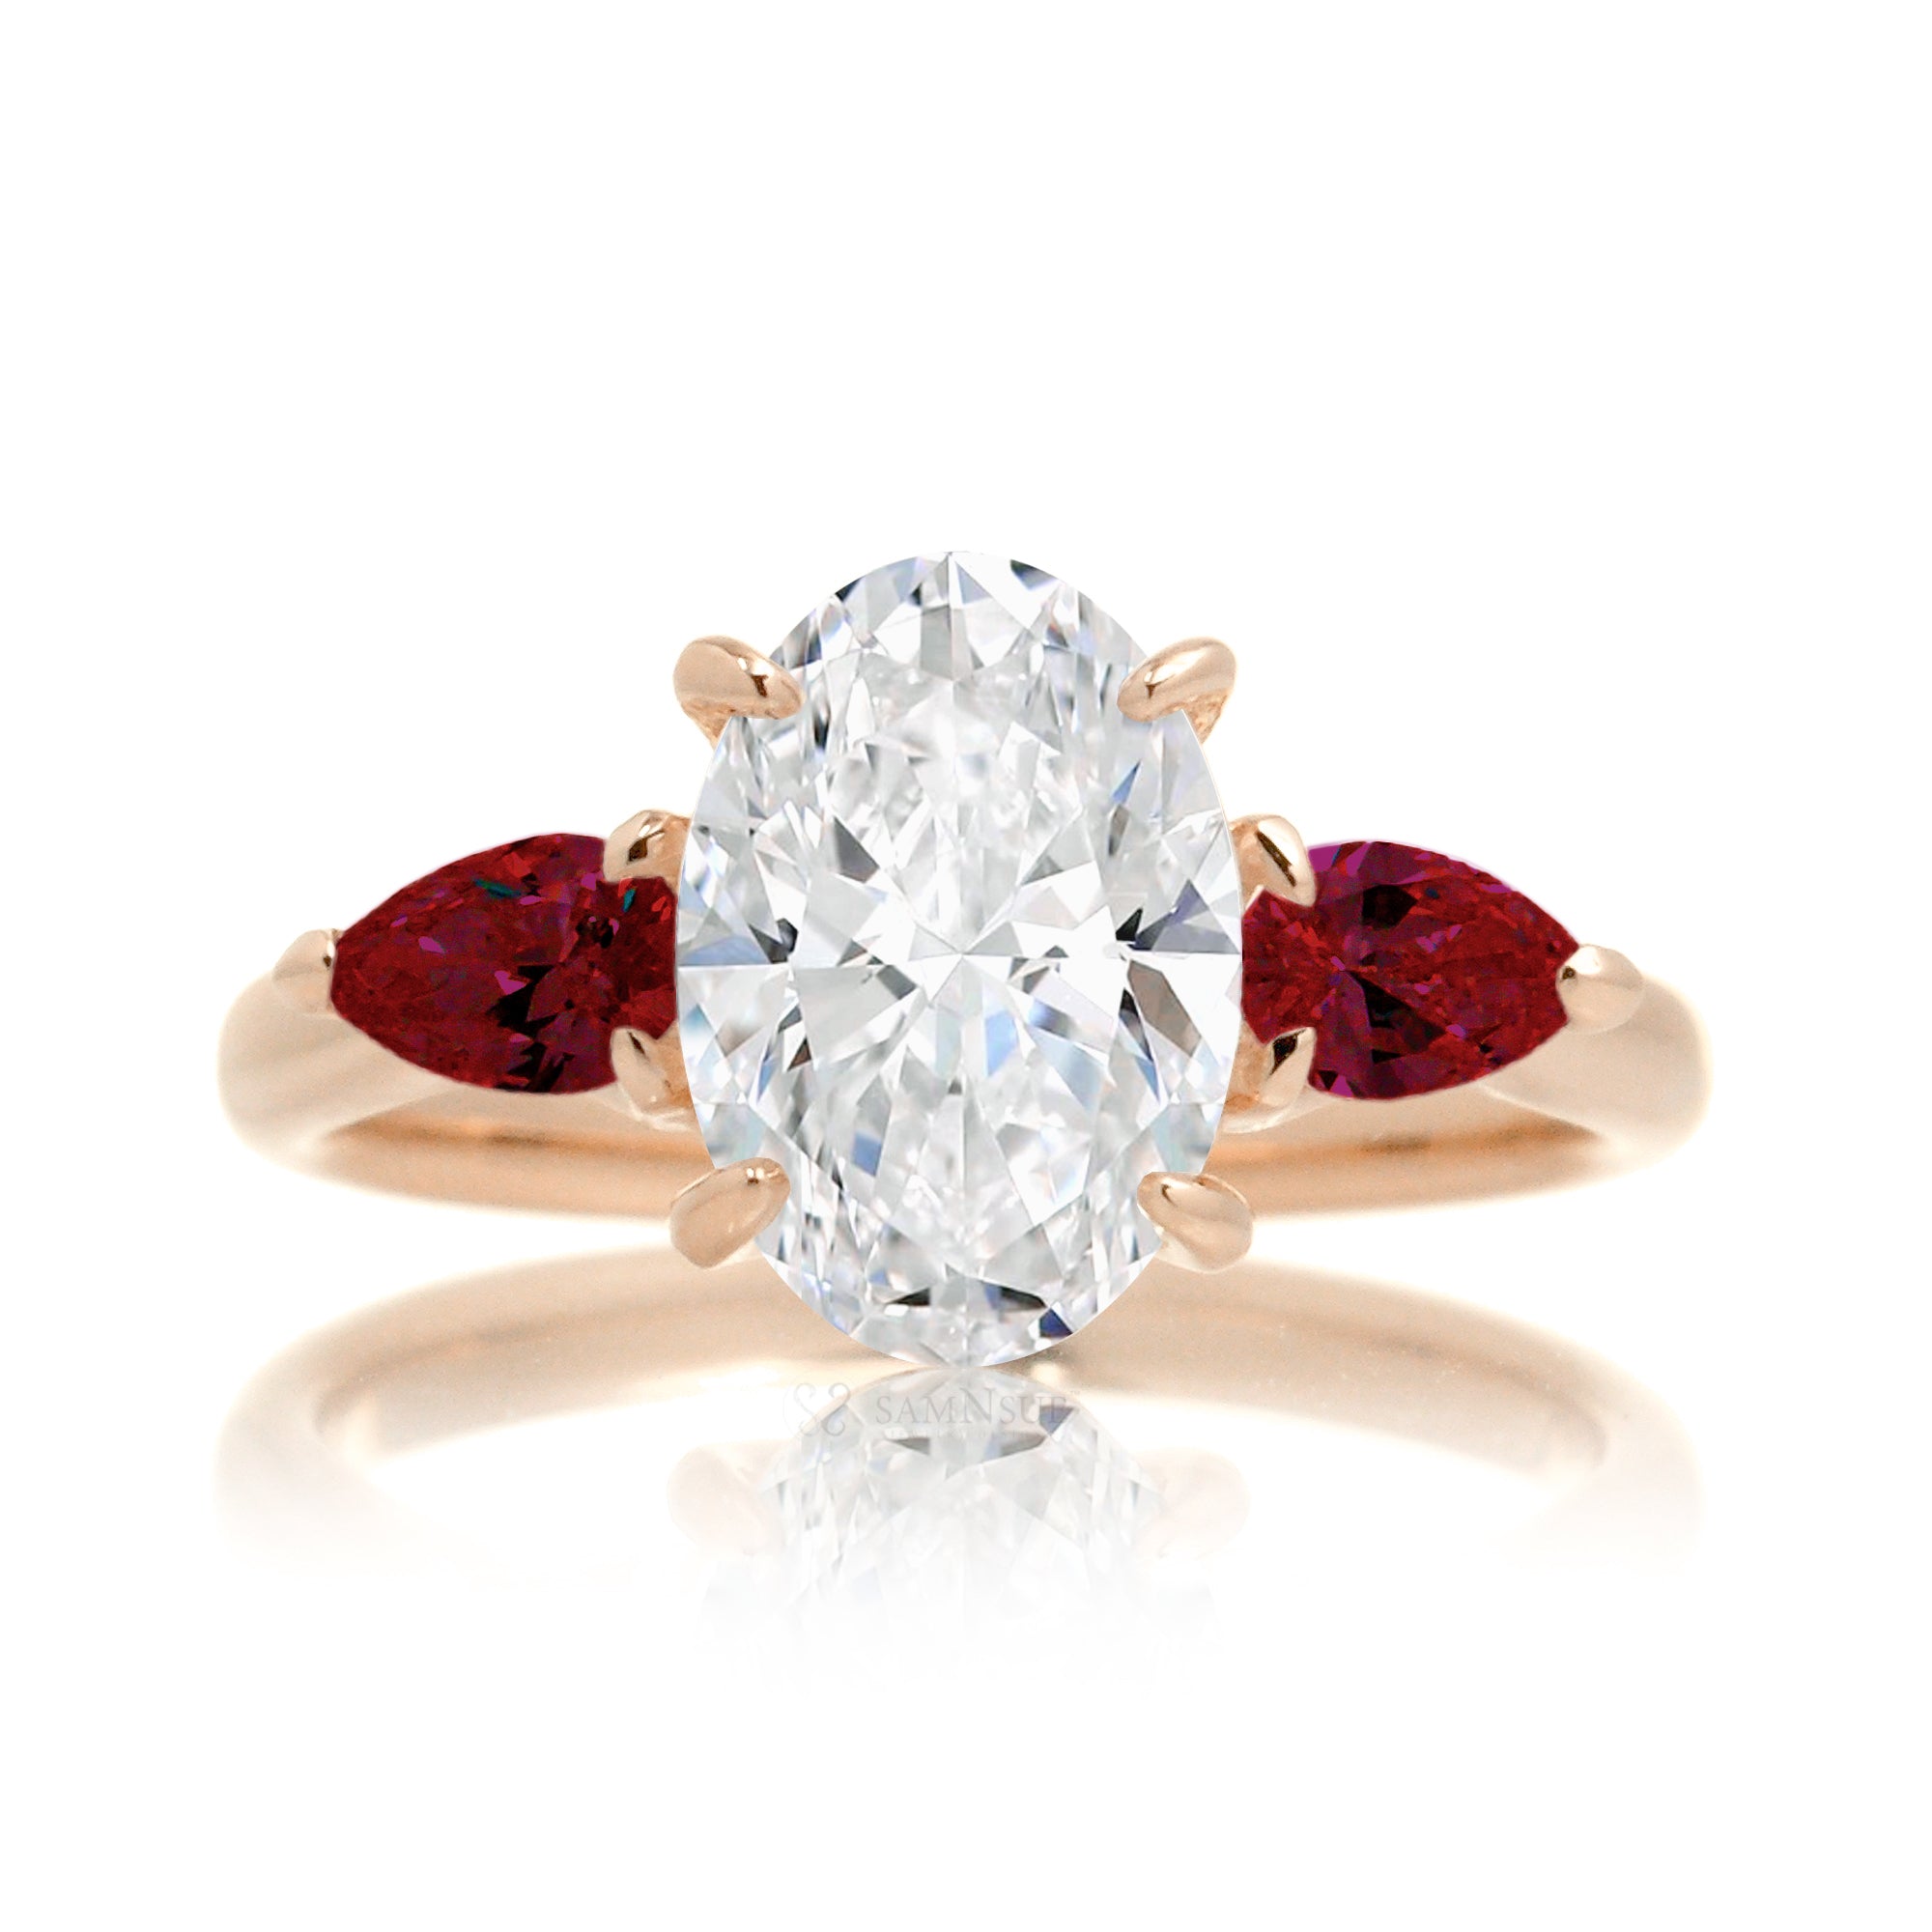 Three-stone pear ruby and oval cut diamond engagement ring rose gold